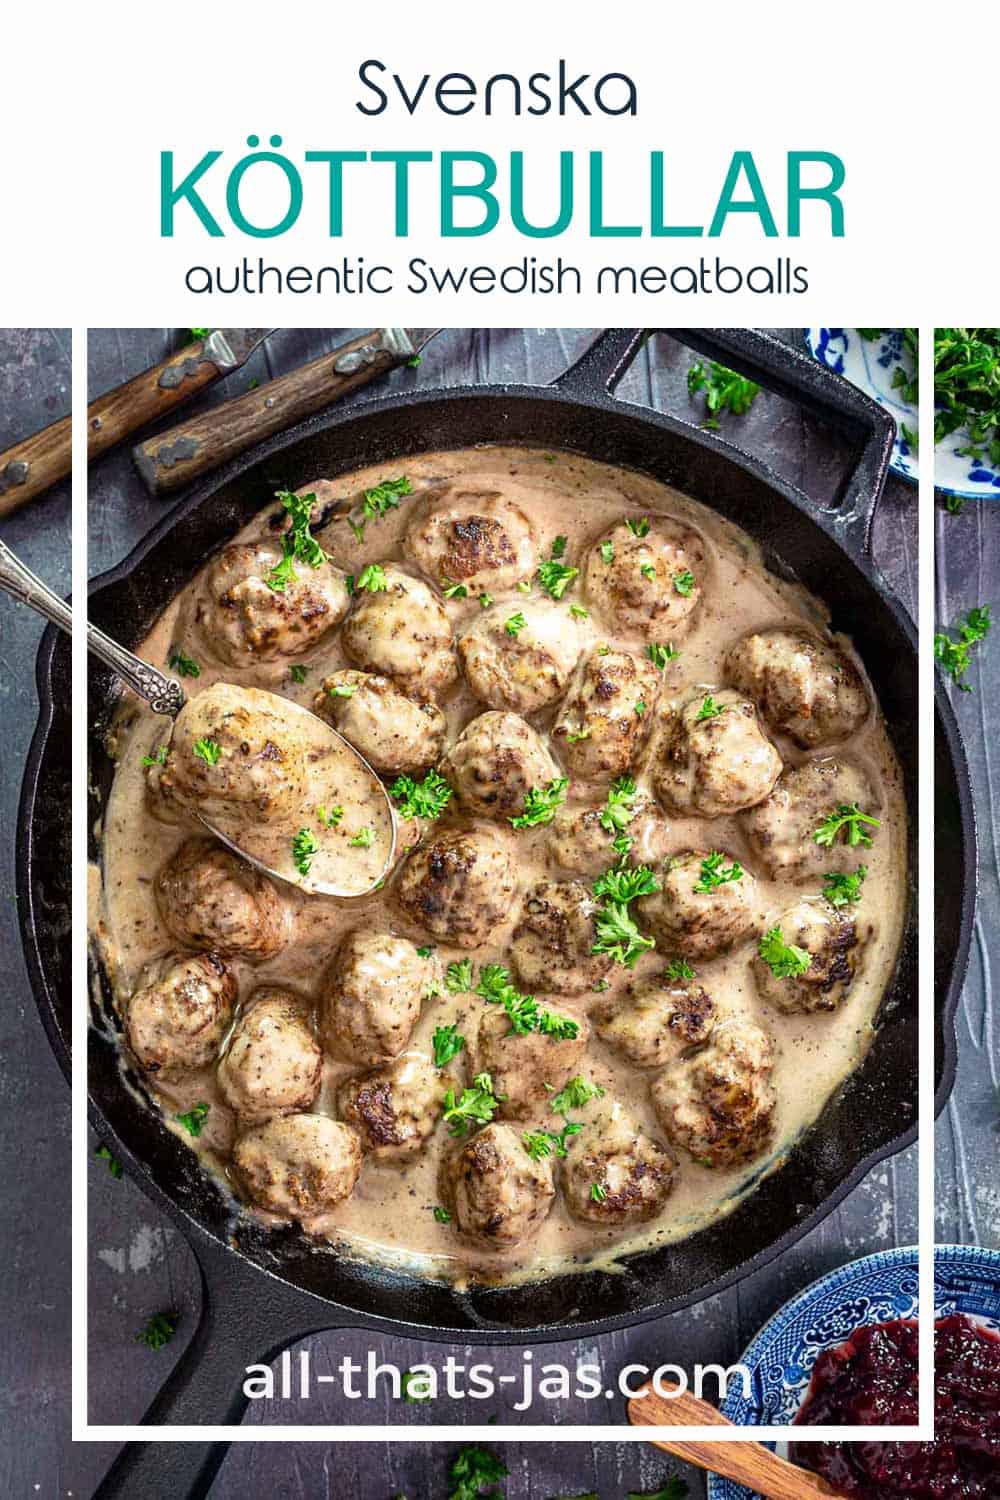 A close up photo of the meatball in cream sauce in a cast-iron skillet with text overlay.